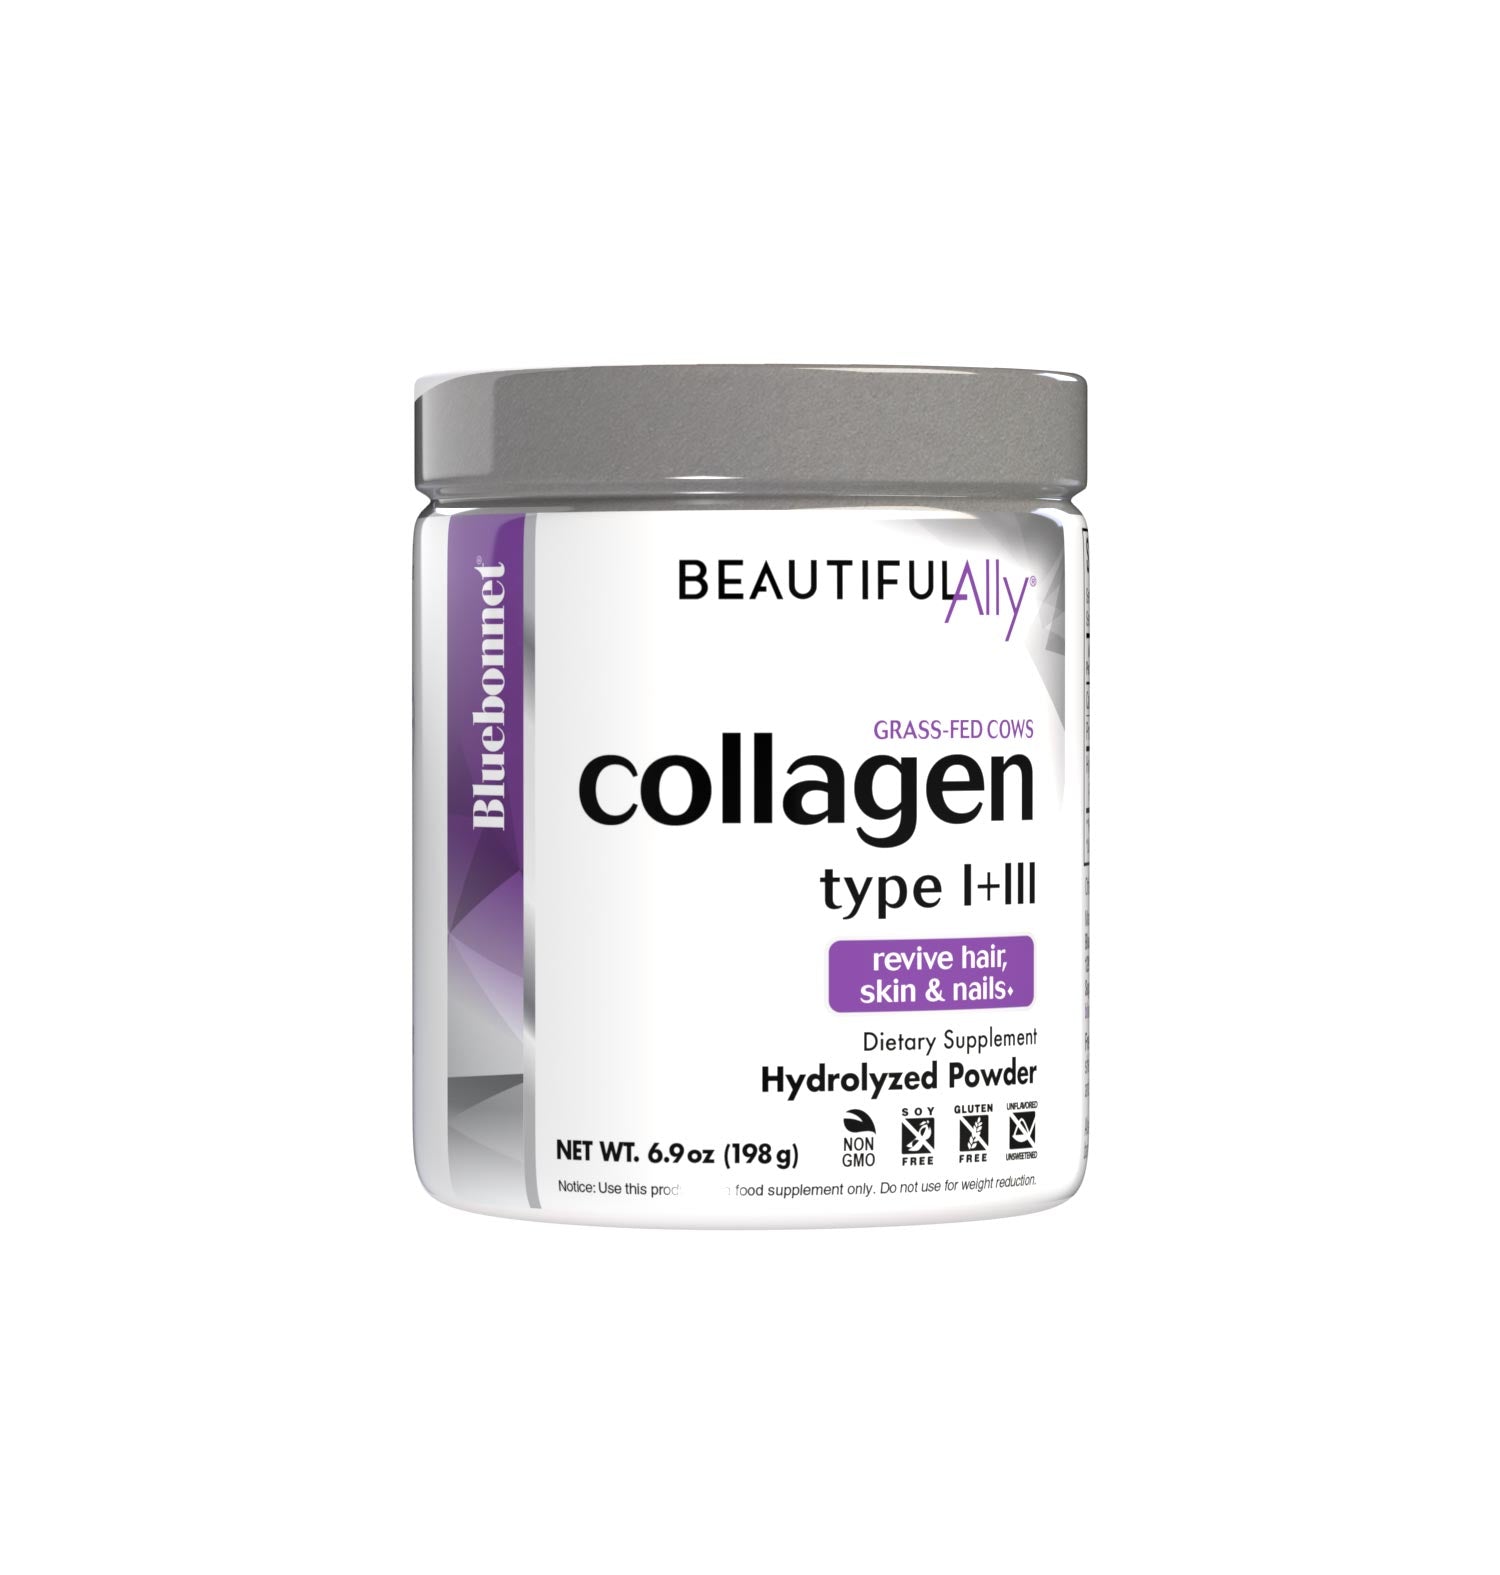 Bluebonnet’s Beautiful Ally Collagen 6.6 g Type I+III Powder is specially formulated to help support skin, hair and nails with collagen peptides type I+III from grass-fed cows. Collagen peptides help to replenish nutrients lost over time by boosting collagen production, which helps to strengthen hair and nails while supporting the skin’s hydration balance and elasticity to counteract visible signs of aging. #size_6.9 oz